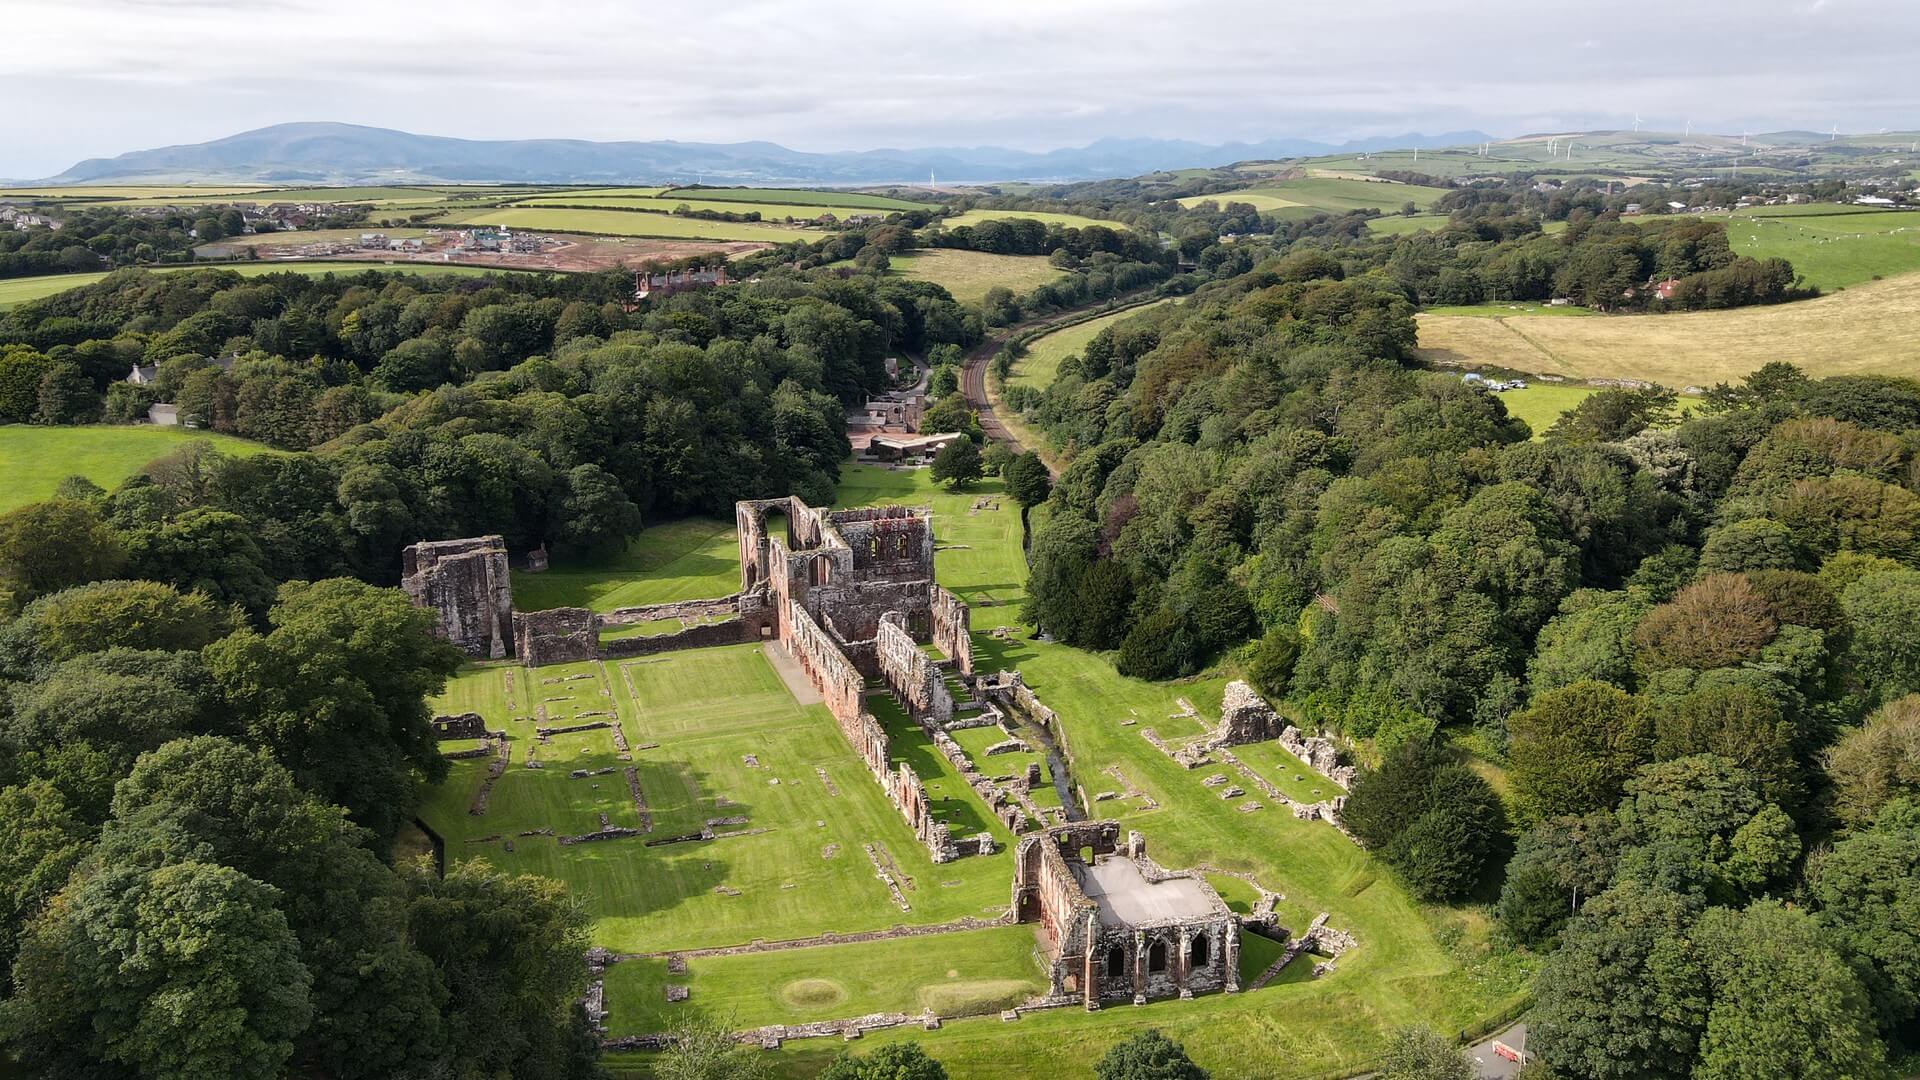 Furness Abbey, built by Catholic nuns in 1123. Disestablished in 1537, it was left to rot, leaving us with this stunning ruin to admire and protect for years to come.
